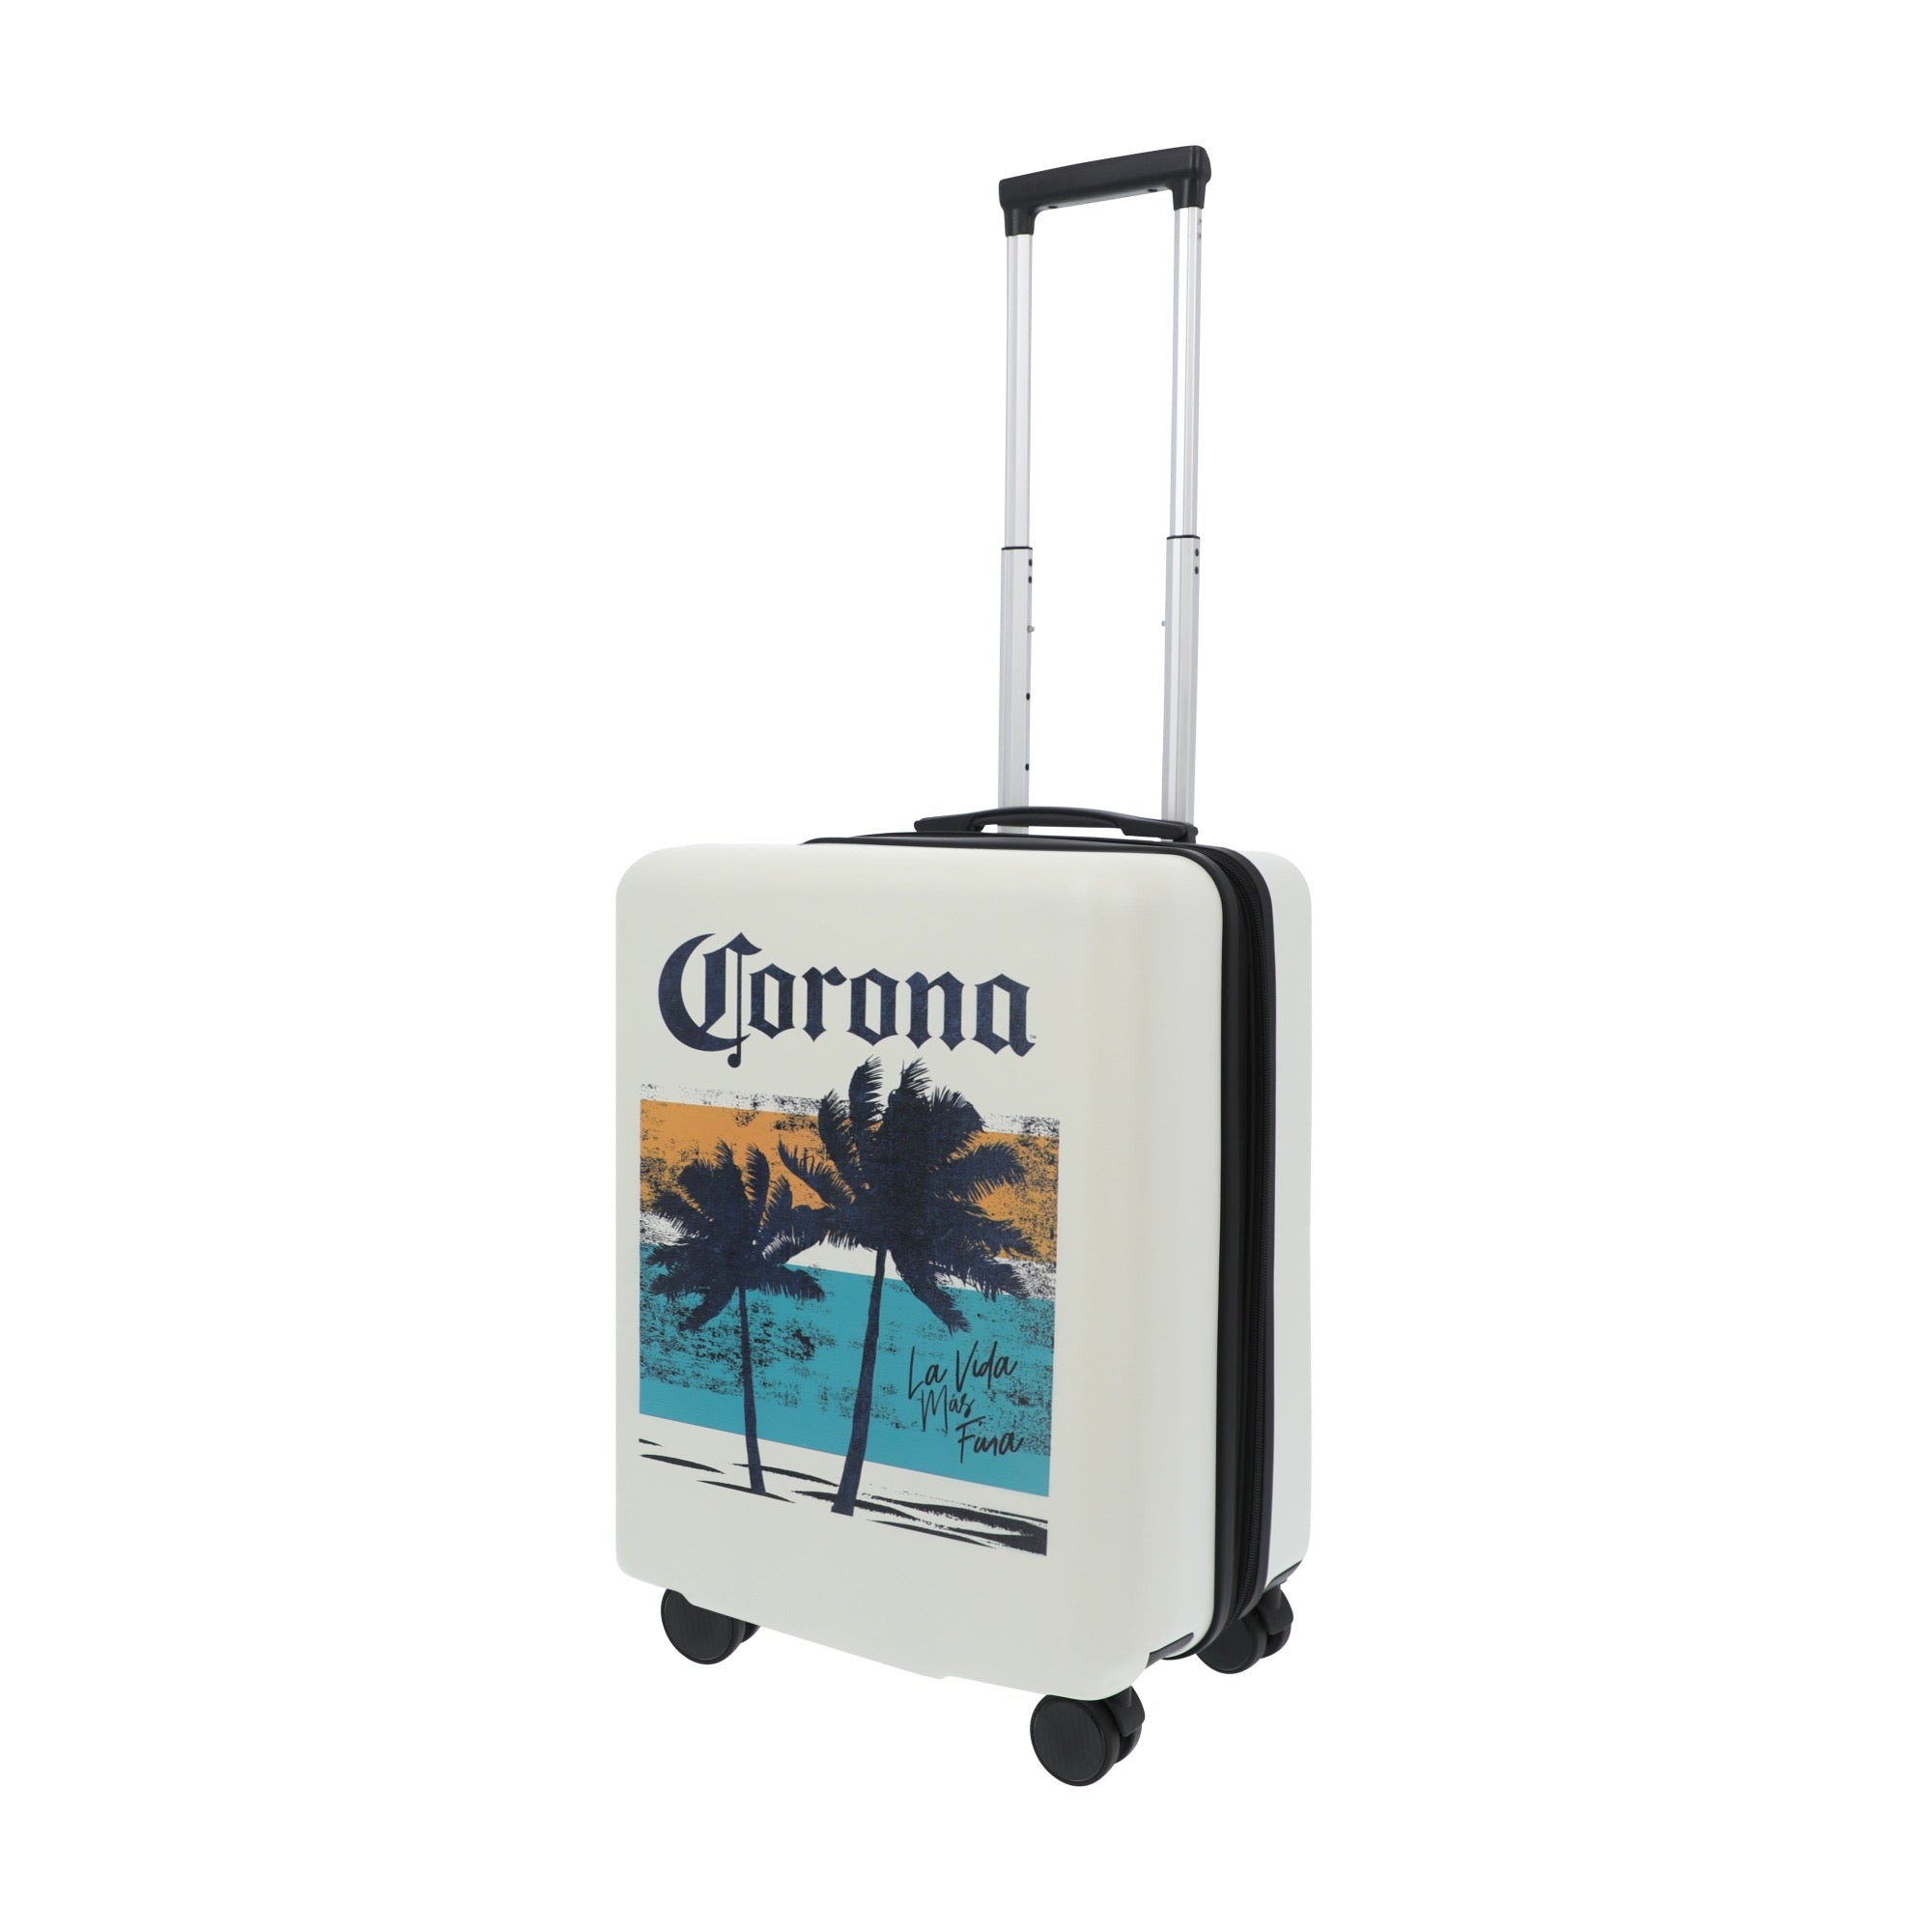 White corona 22.5" carry-on spinner suitcase luggage by Ful